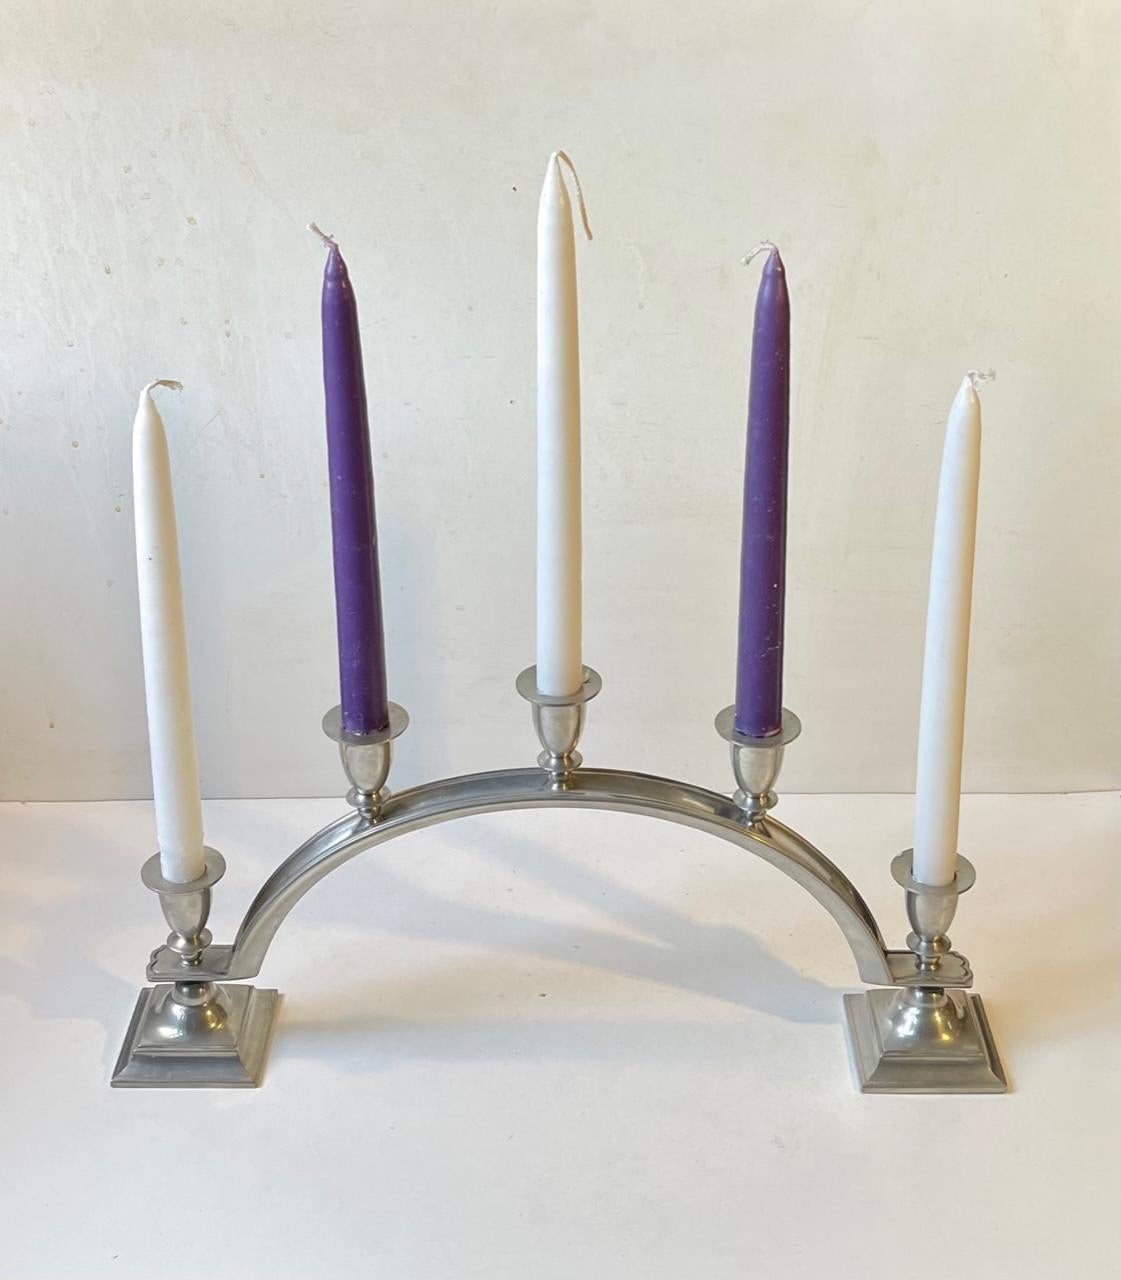 Important and very rare Just Andersen pewter candelabra in an arched design. Distinct architecturally inspired Art Deco styling with its discrete decor and 'staired' configuration. It is to be fitted with 5 regular sized candles over its reach/width